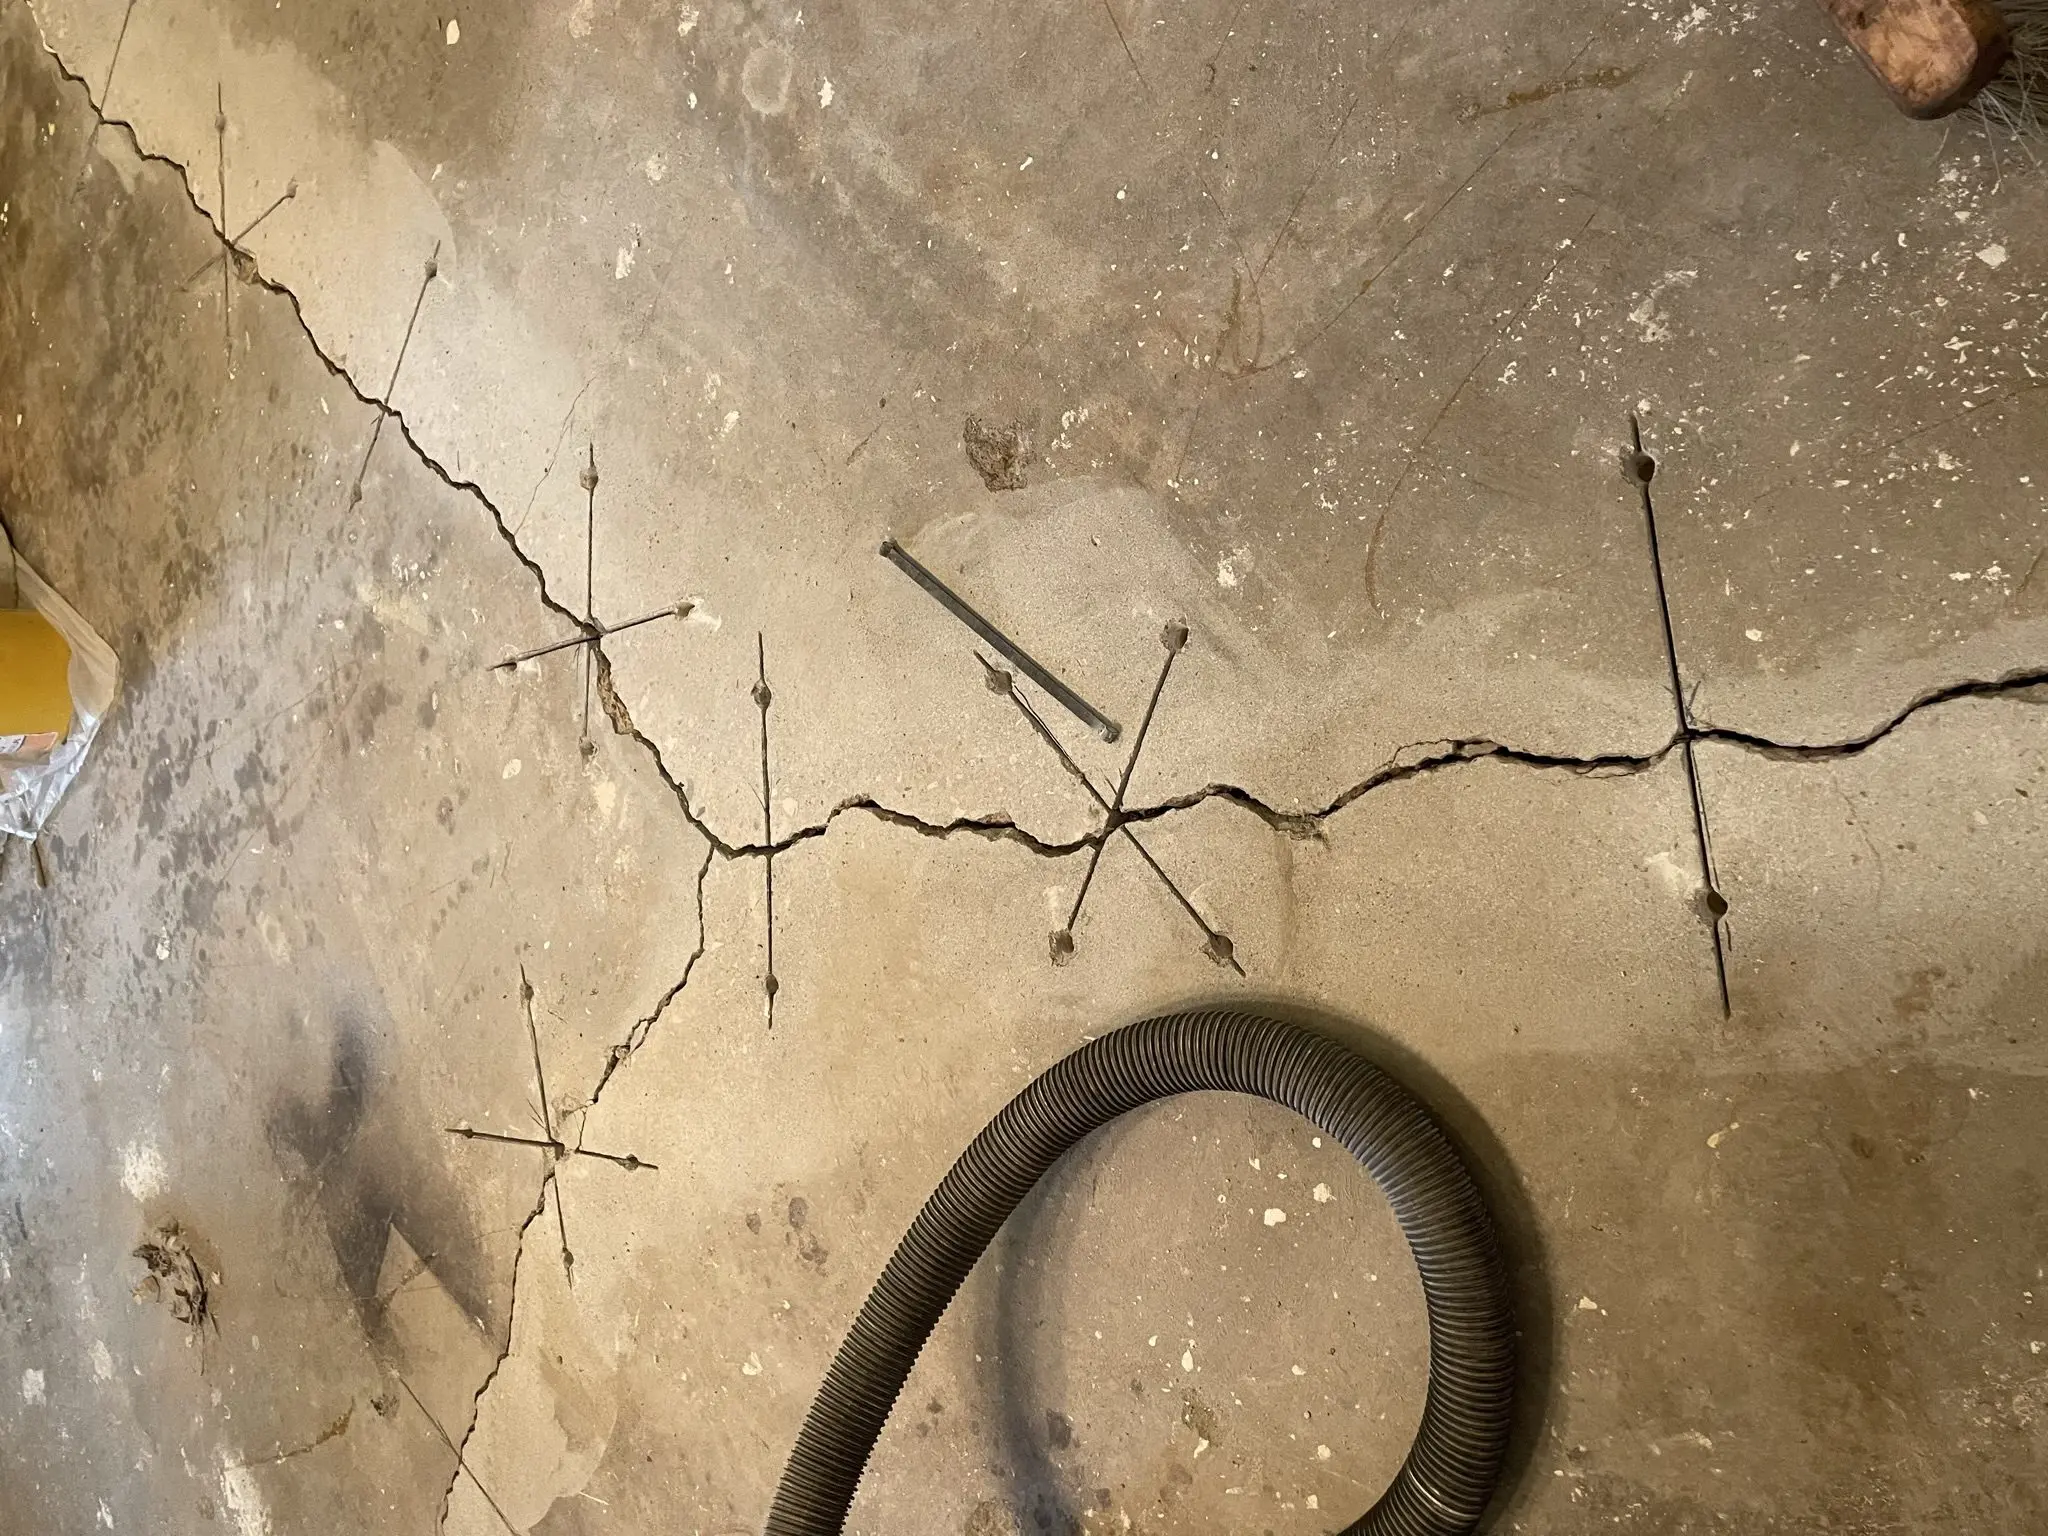 An image showing the raw concrete floor with visible stitches.